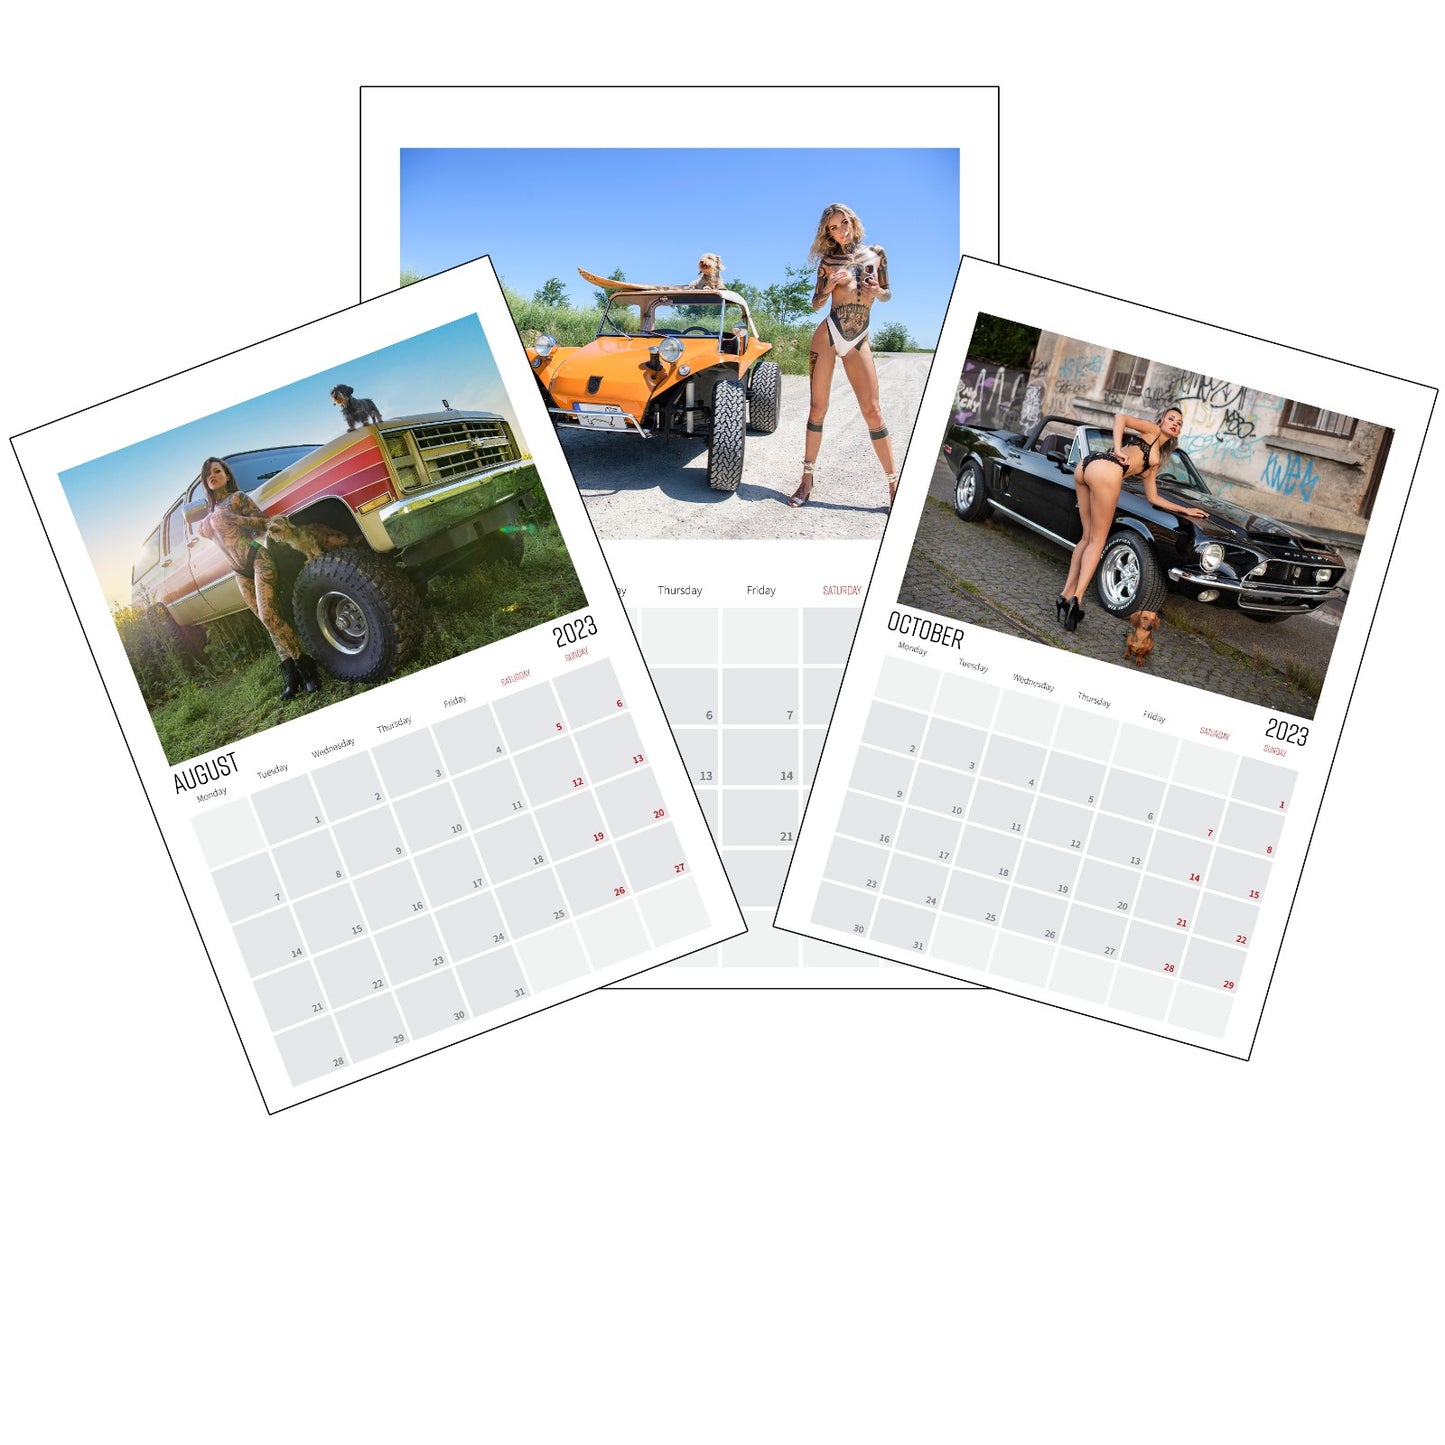 Dackel Girls and Cars Kalender 2023 in A4